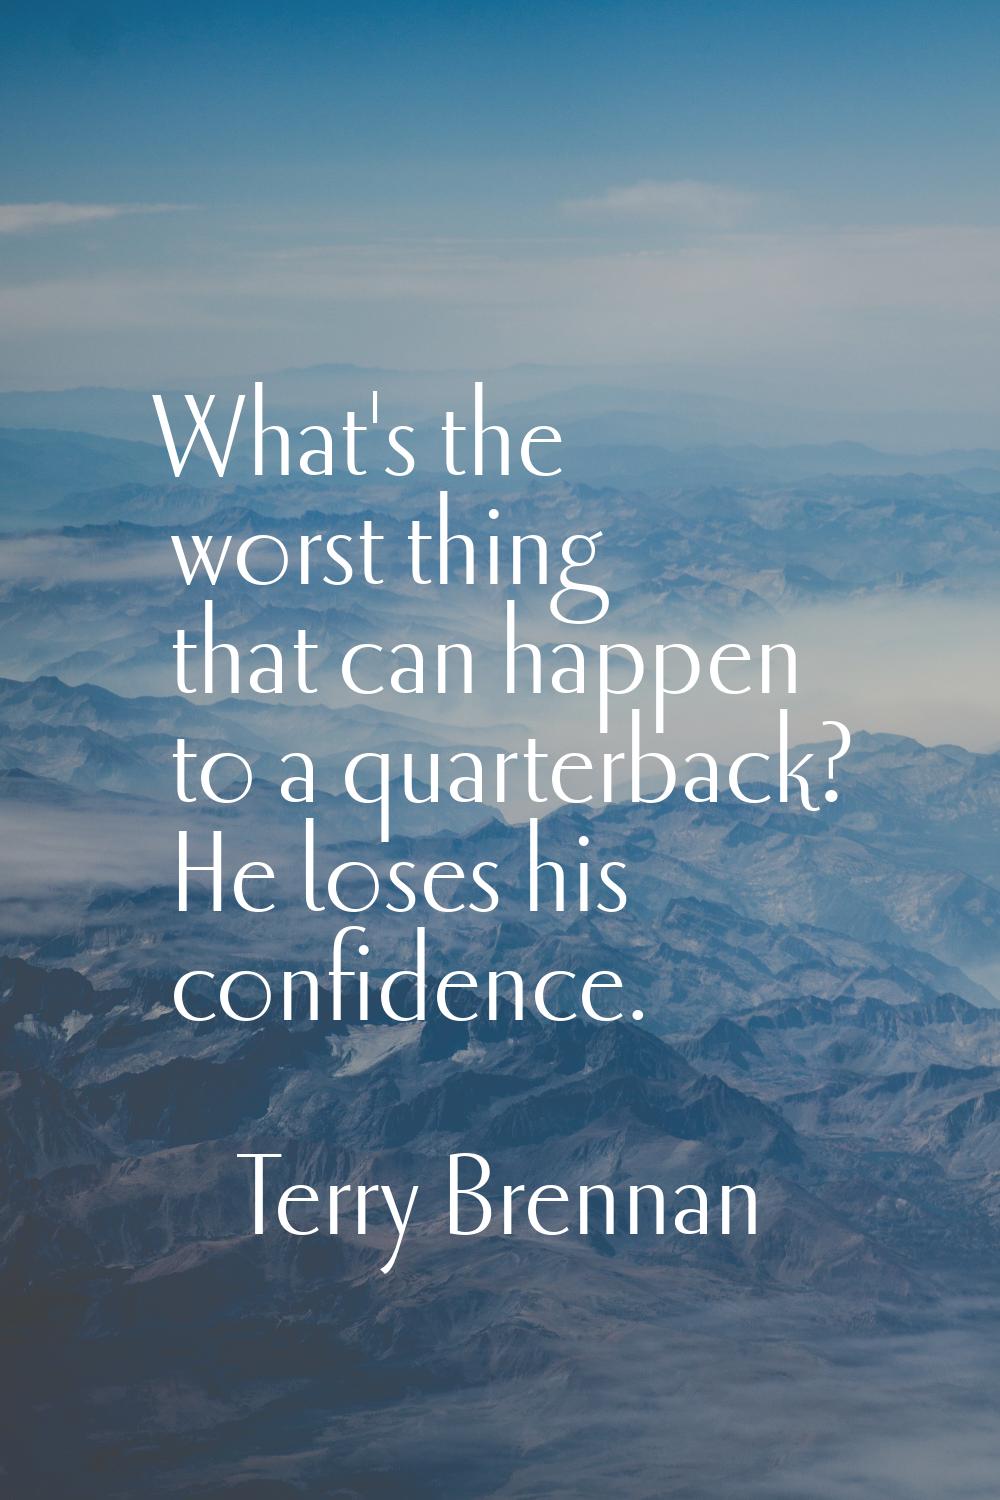 What's the worst thing that can happen to a quarterback? He loses his confidence.